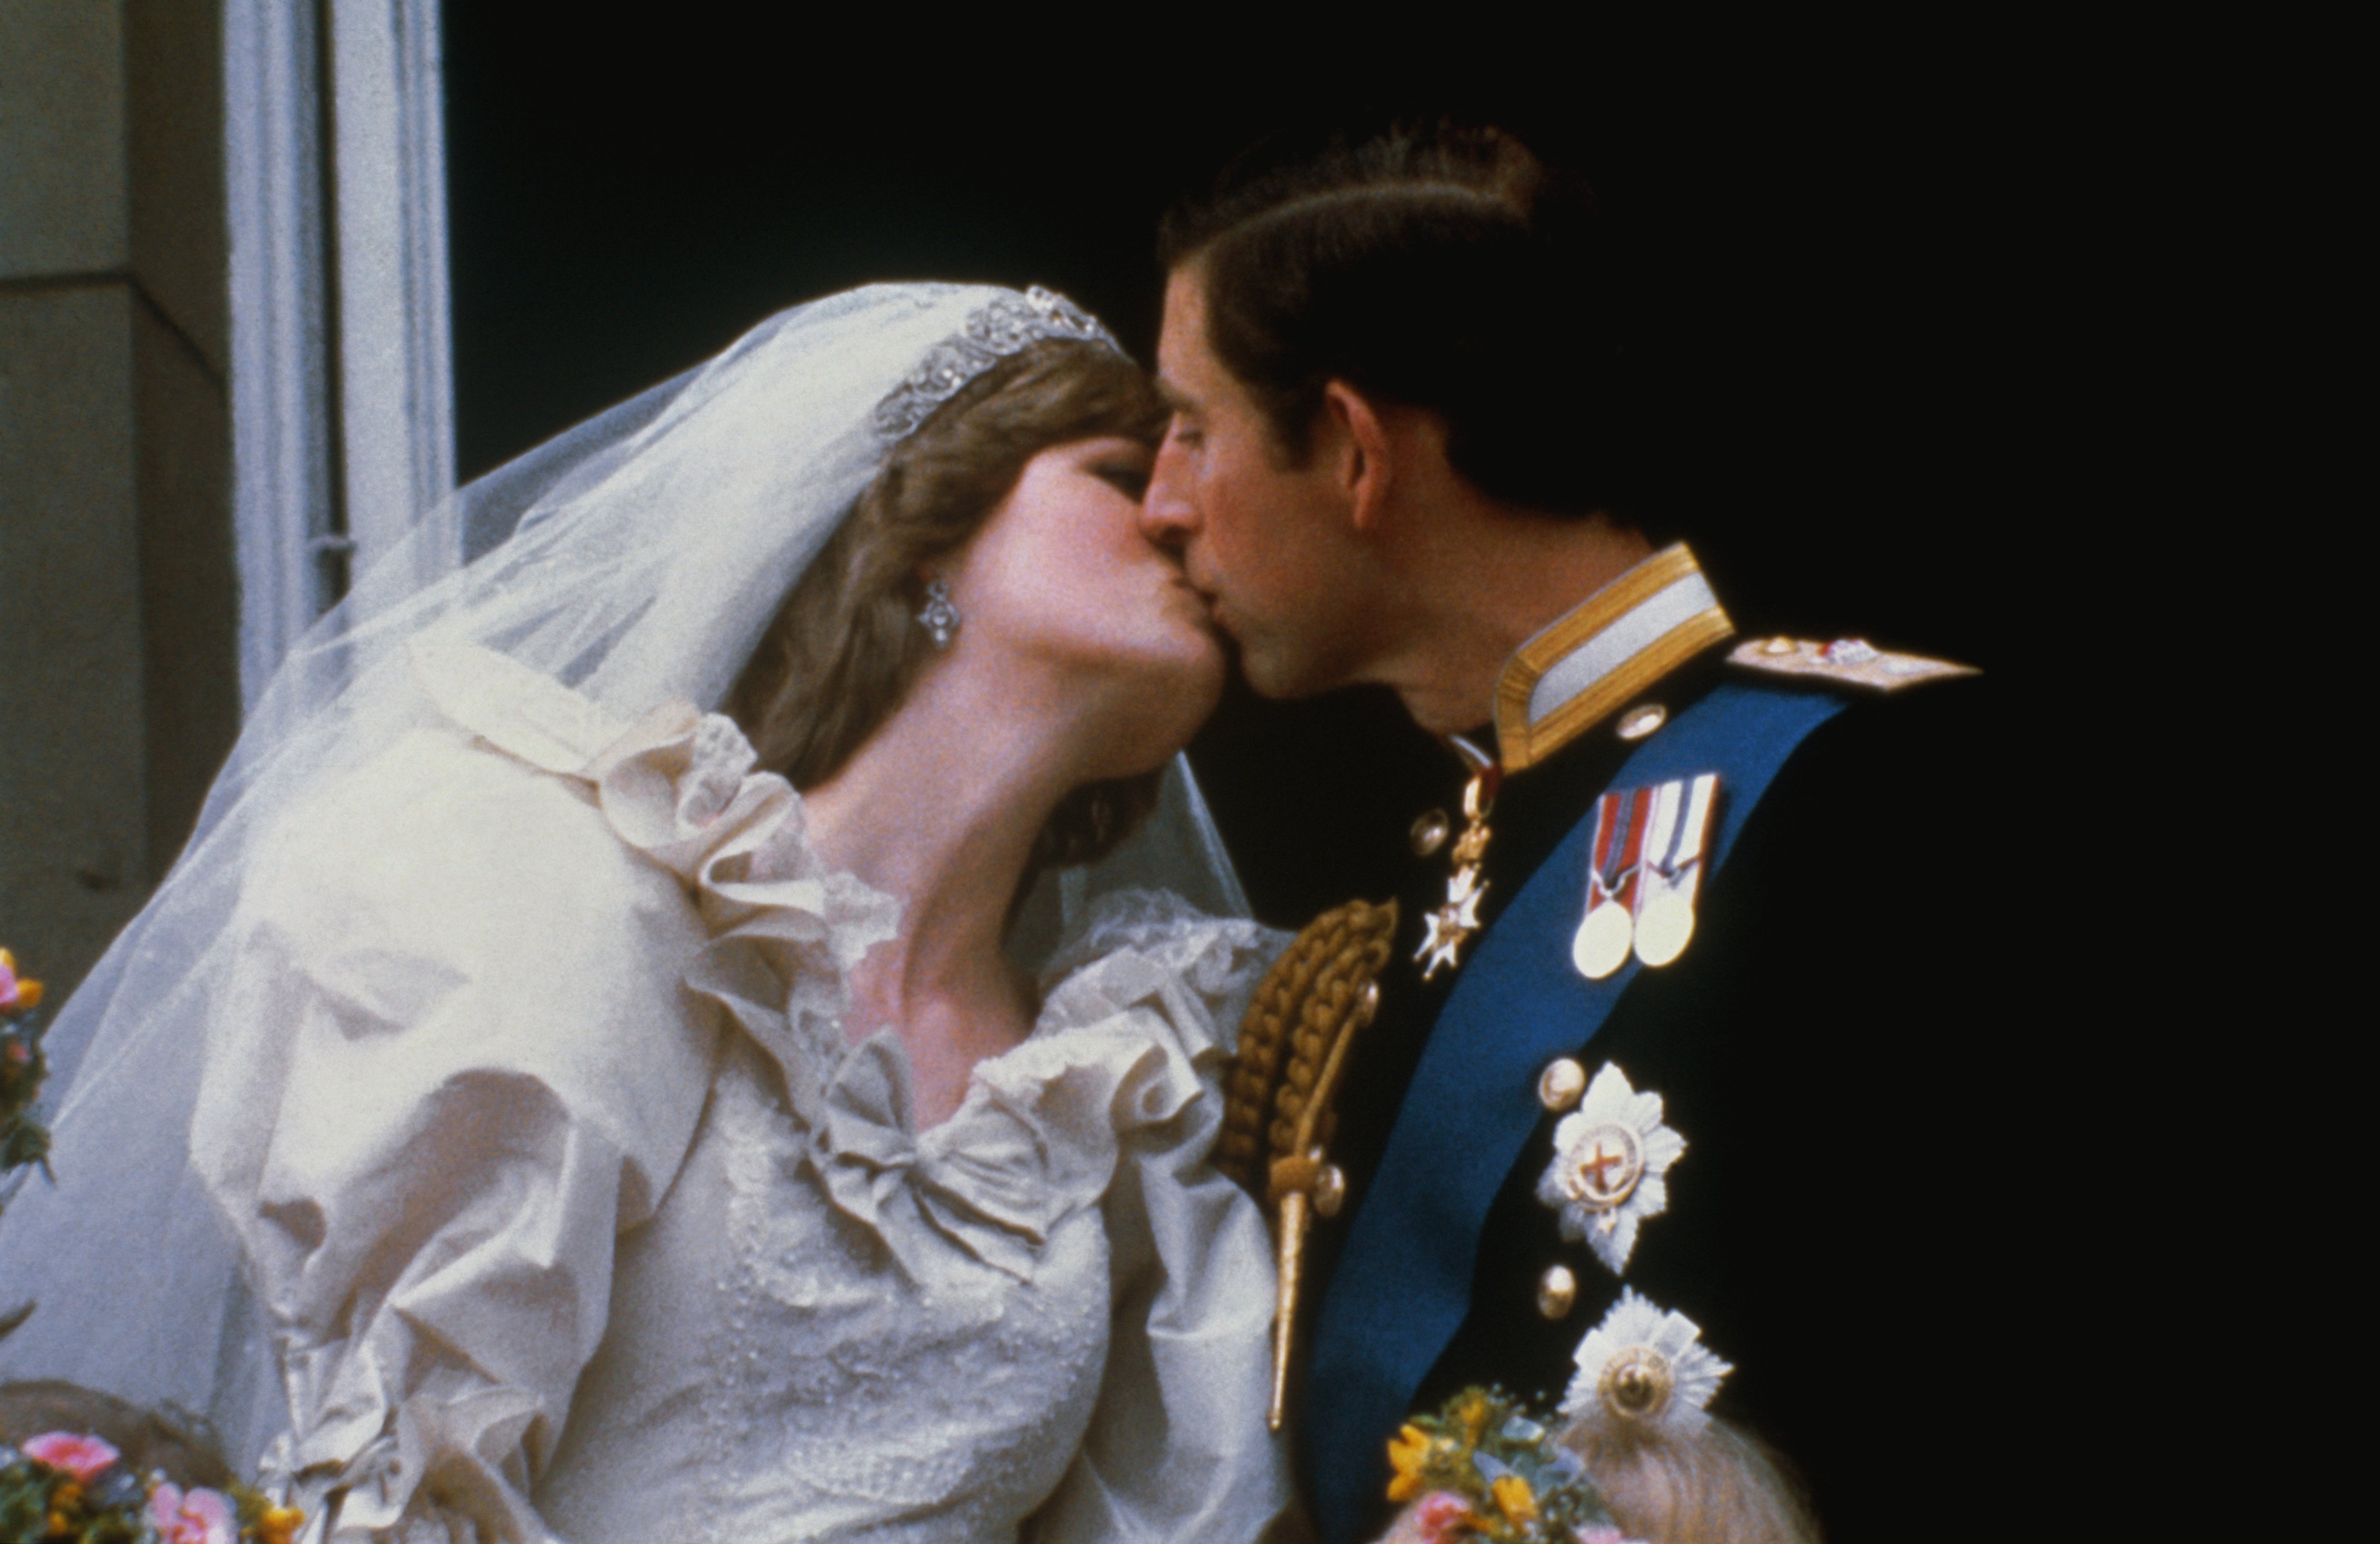 Prince Charles, Prince of Wales and Diana, Princess of Wales, share a kiss on the balcony of Buckingham Palace, following their wedding on July 29, 1981 in London, England. | Source: Getty Images